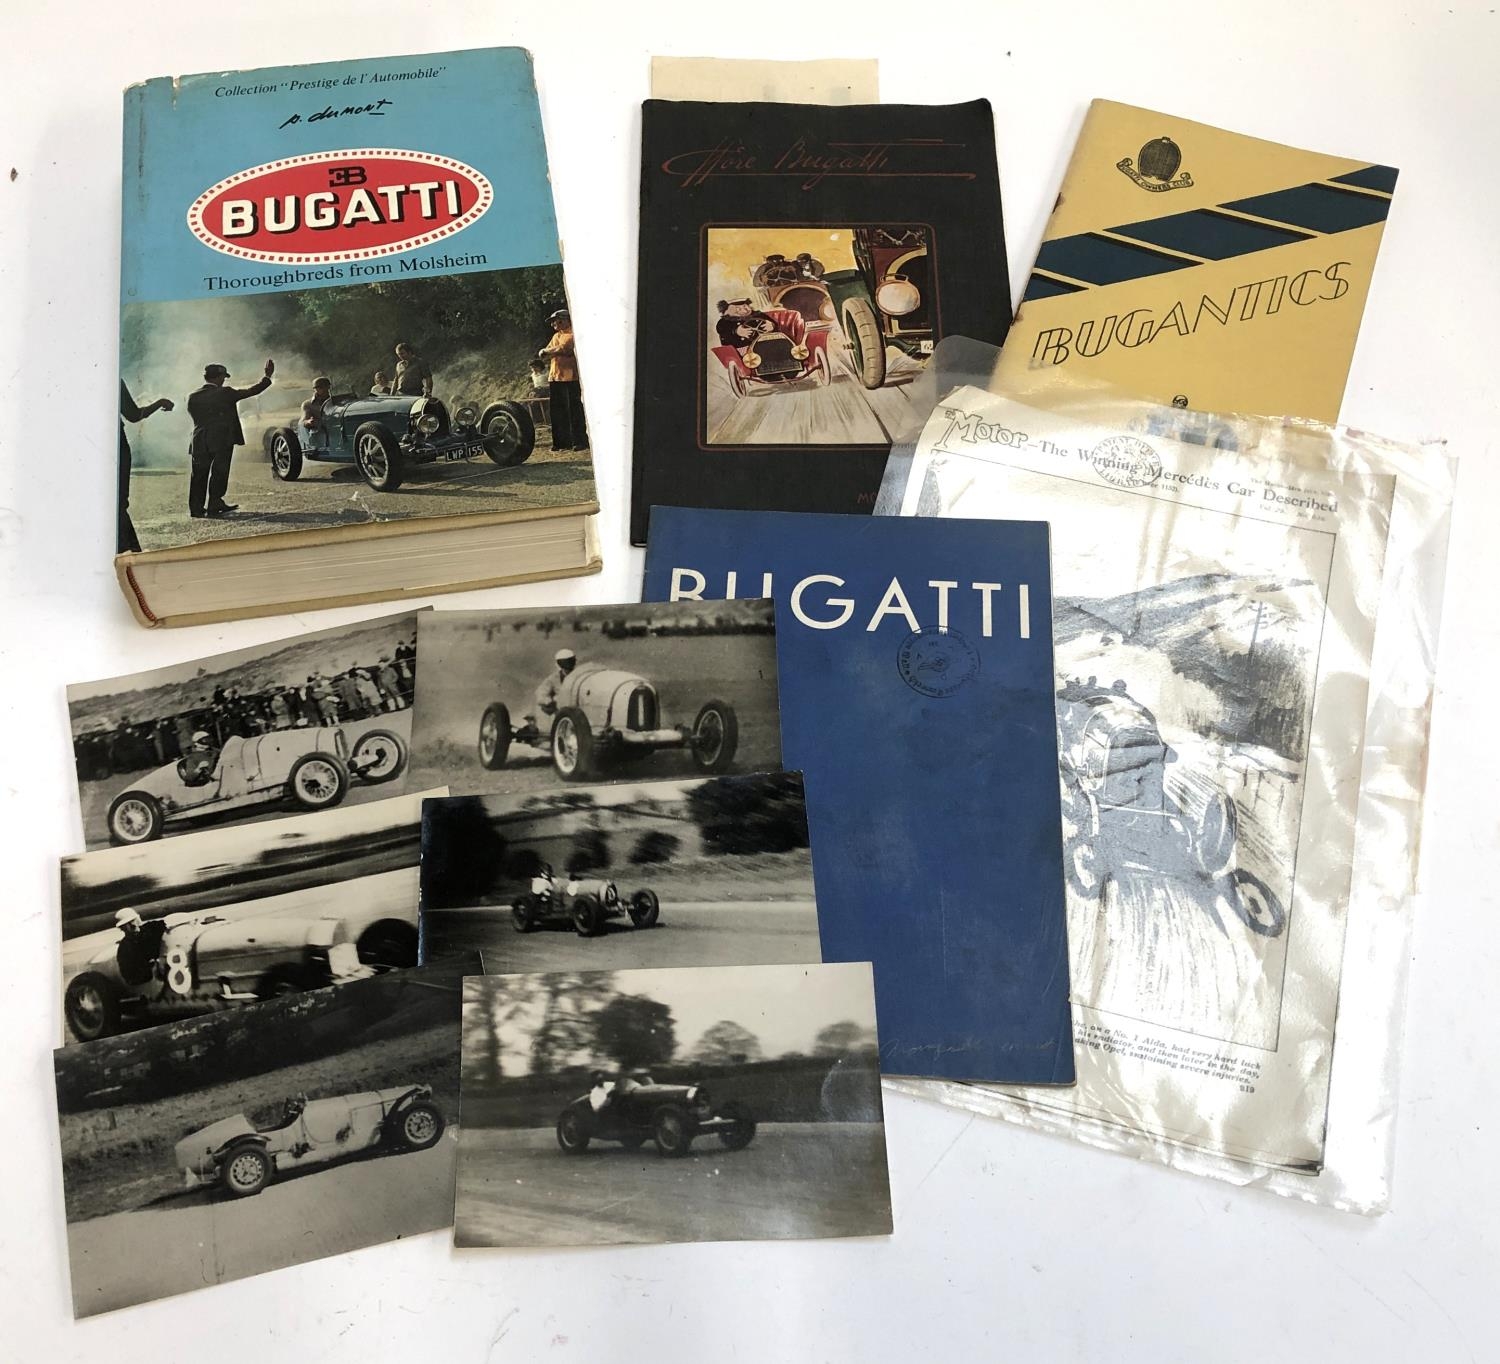 BUGATTI AUTOS BOOKS AND EPHEMERA. A very interesting small group. Firstly, a small pamphlet, '